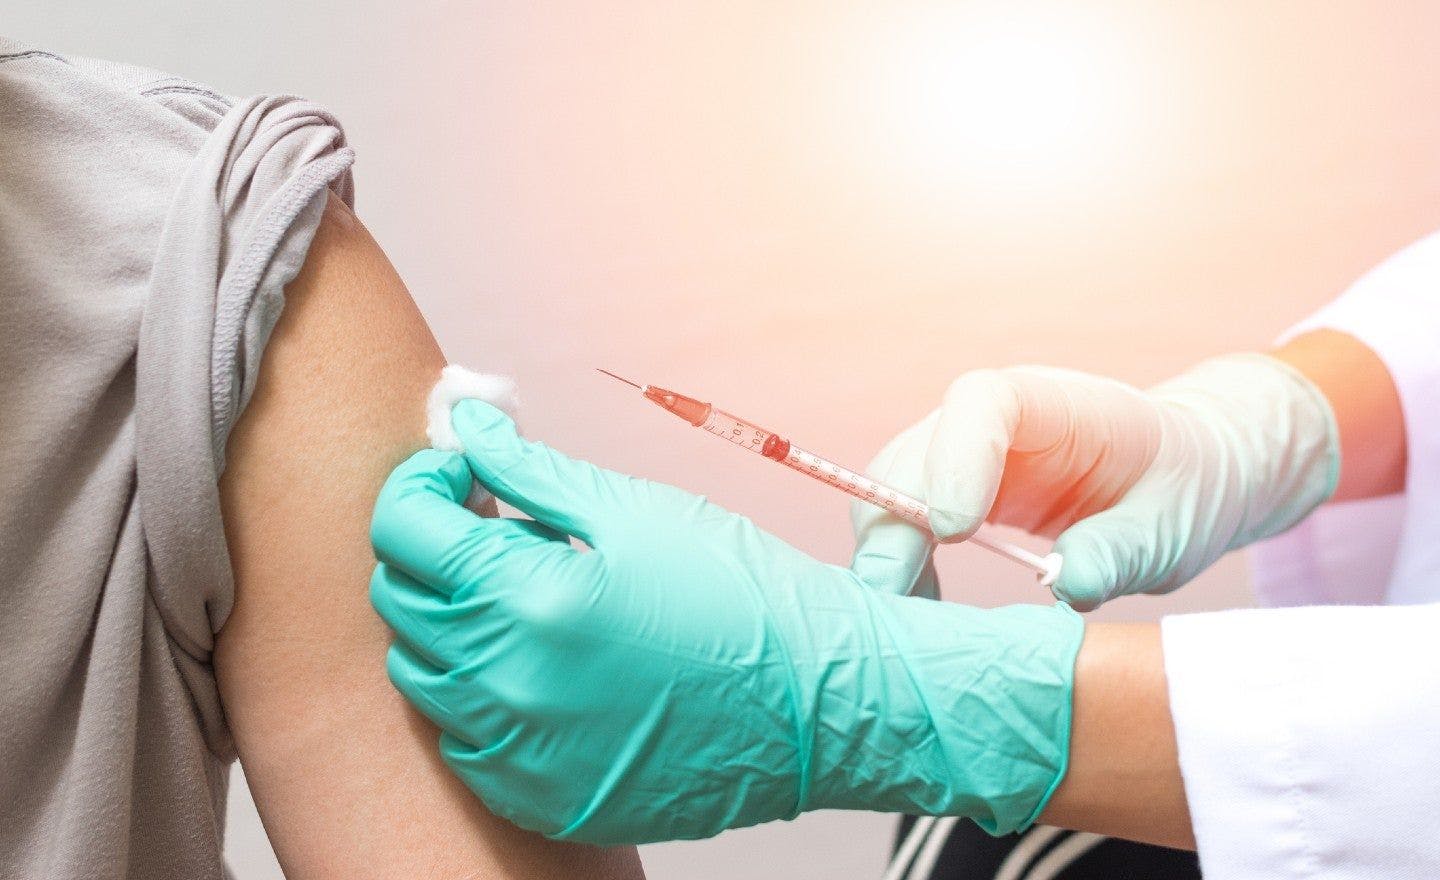 Study: Vaccinated Patients Less Likely to Need Critical Care During Omicron Surge